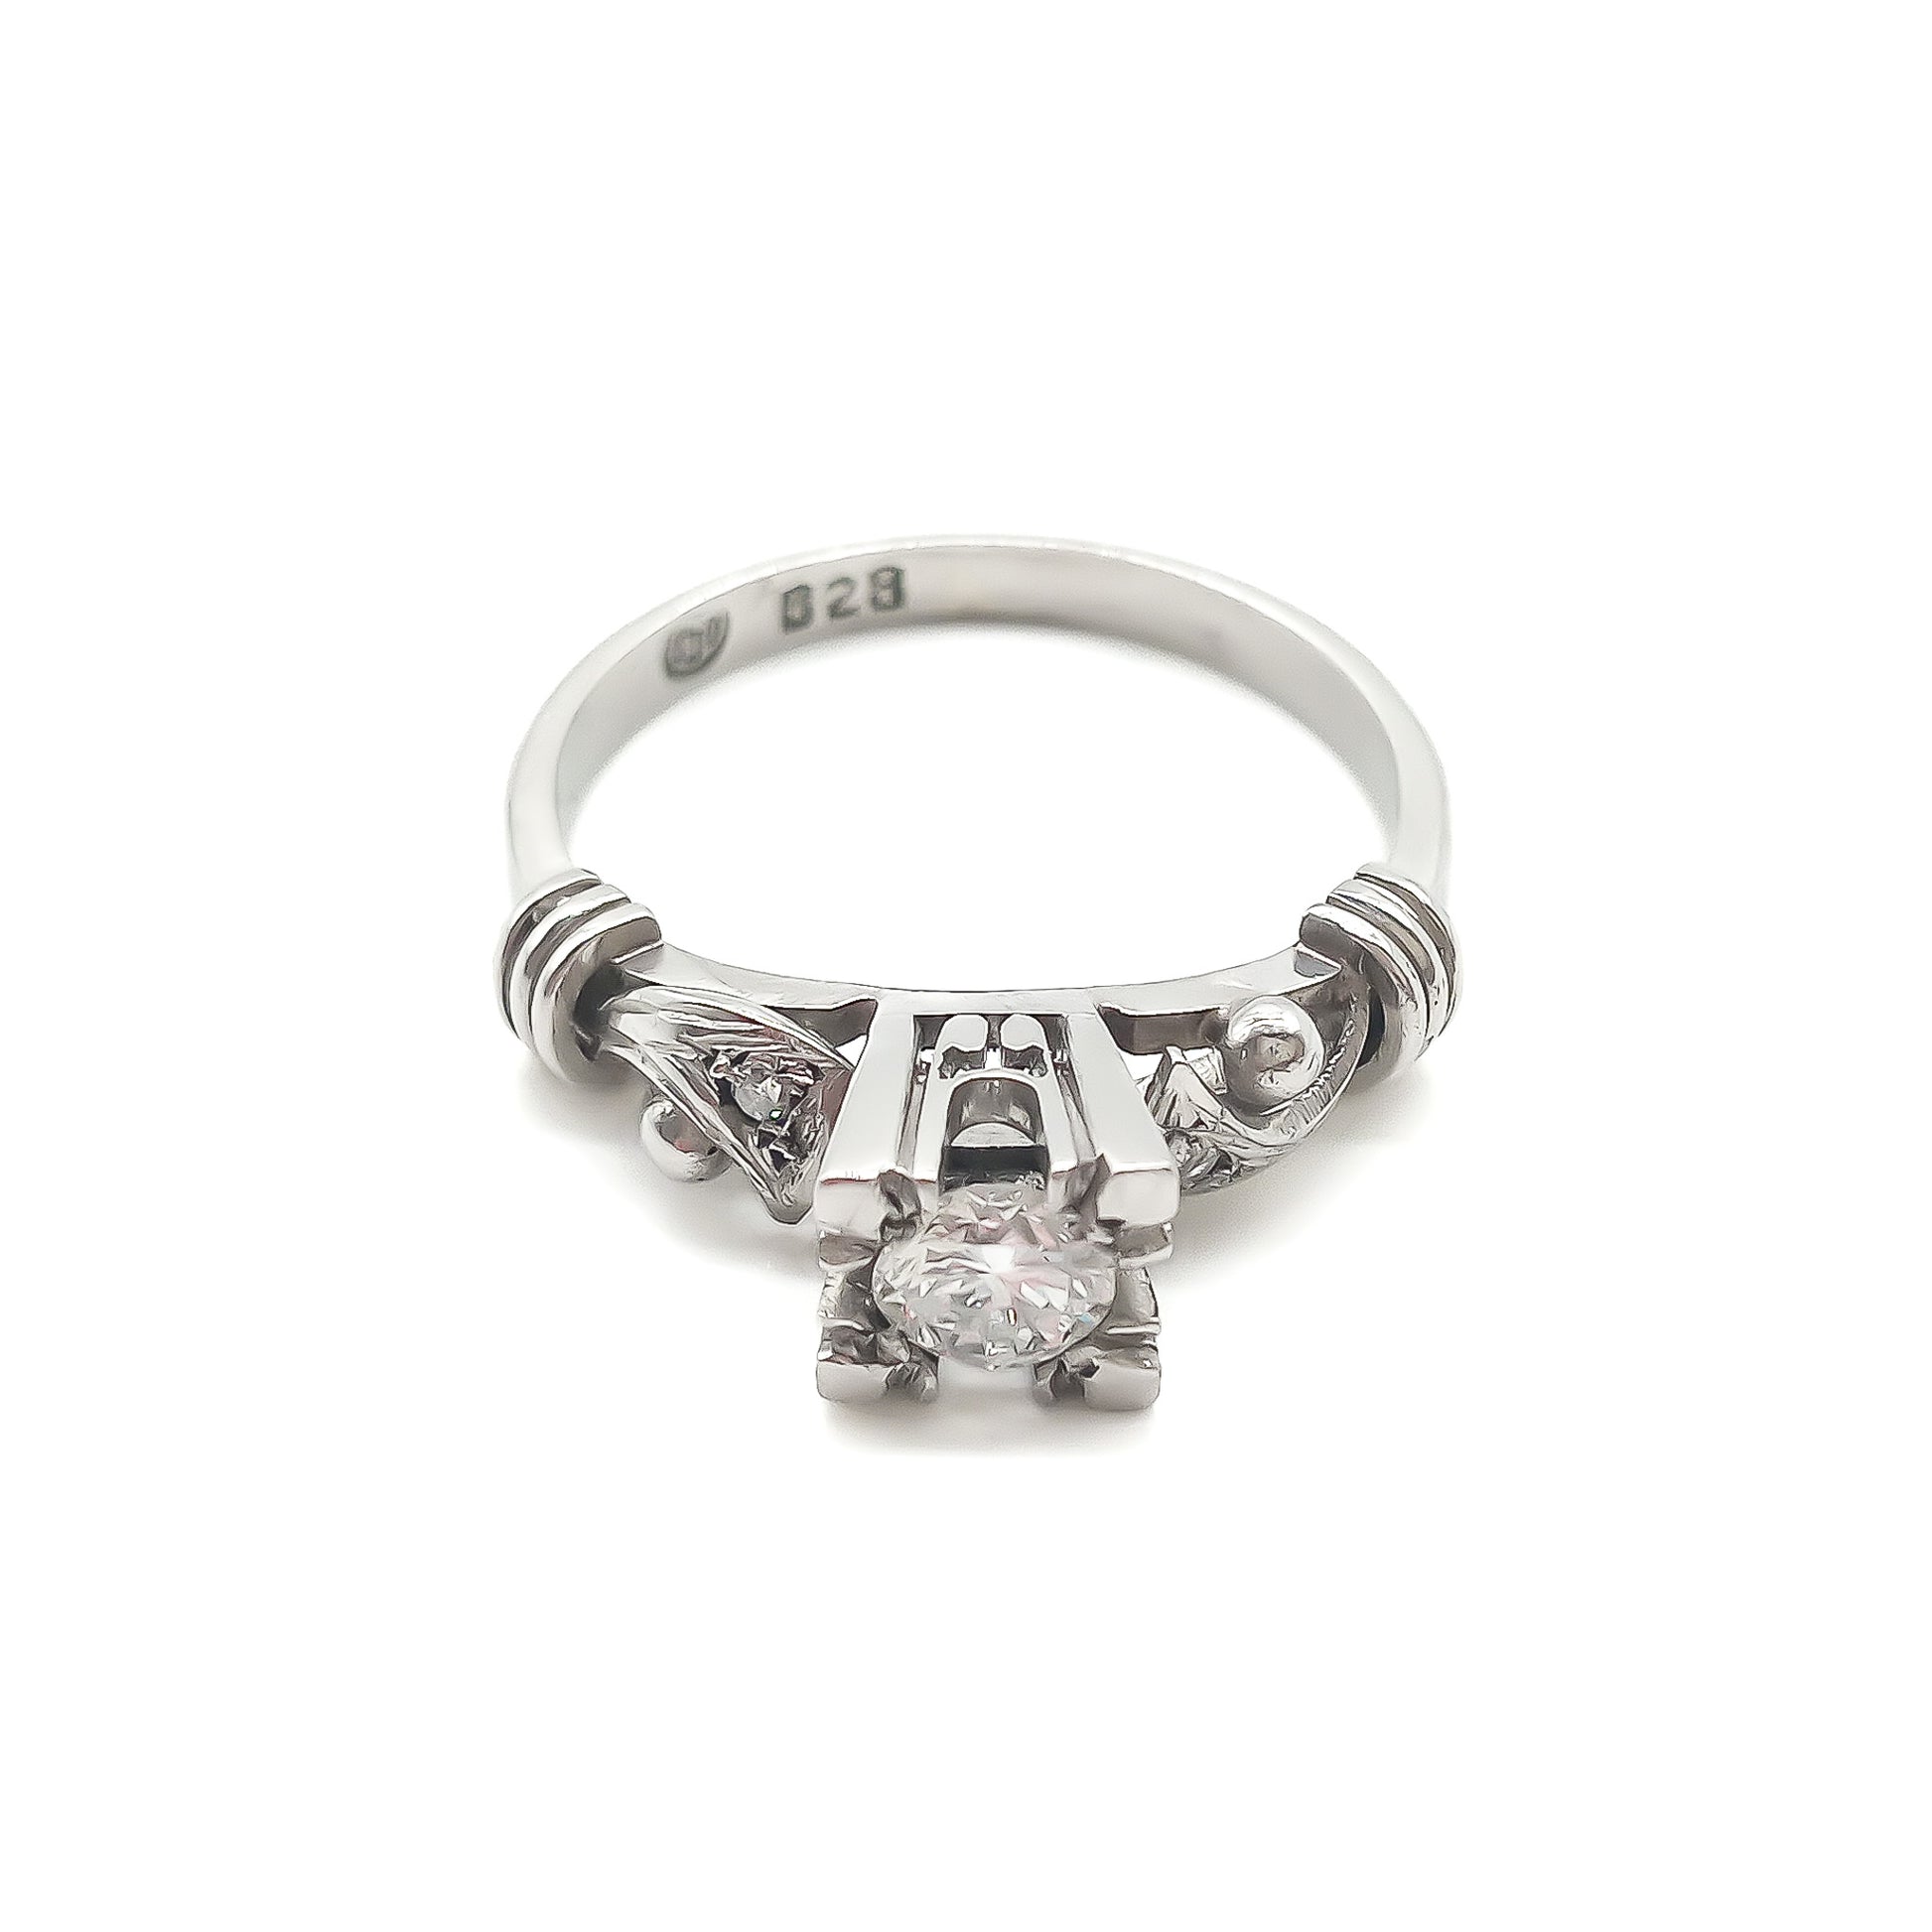 Classic platinum ring with intricate detail, set with an old-cut solitaire diamond and a small diamond on each shoulder. Argentina